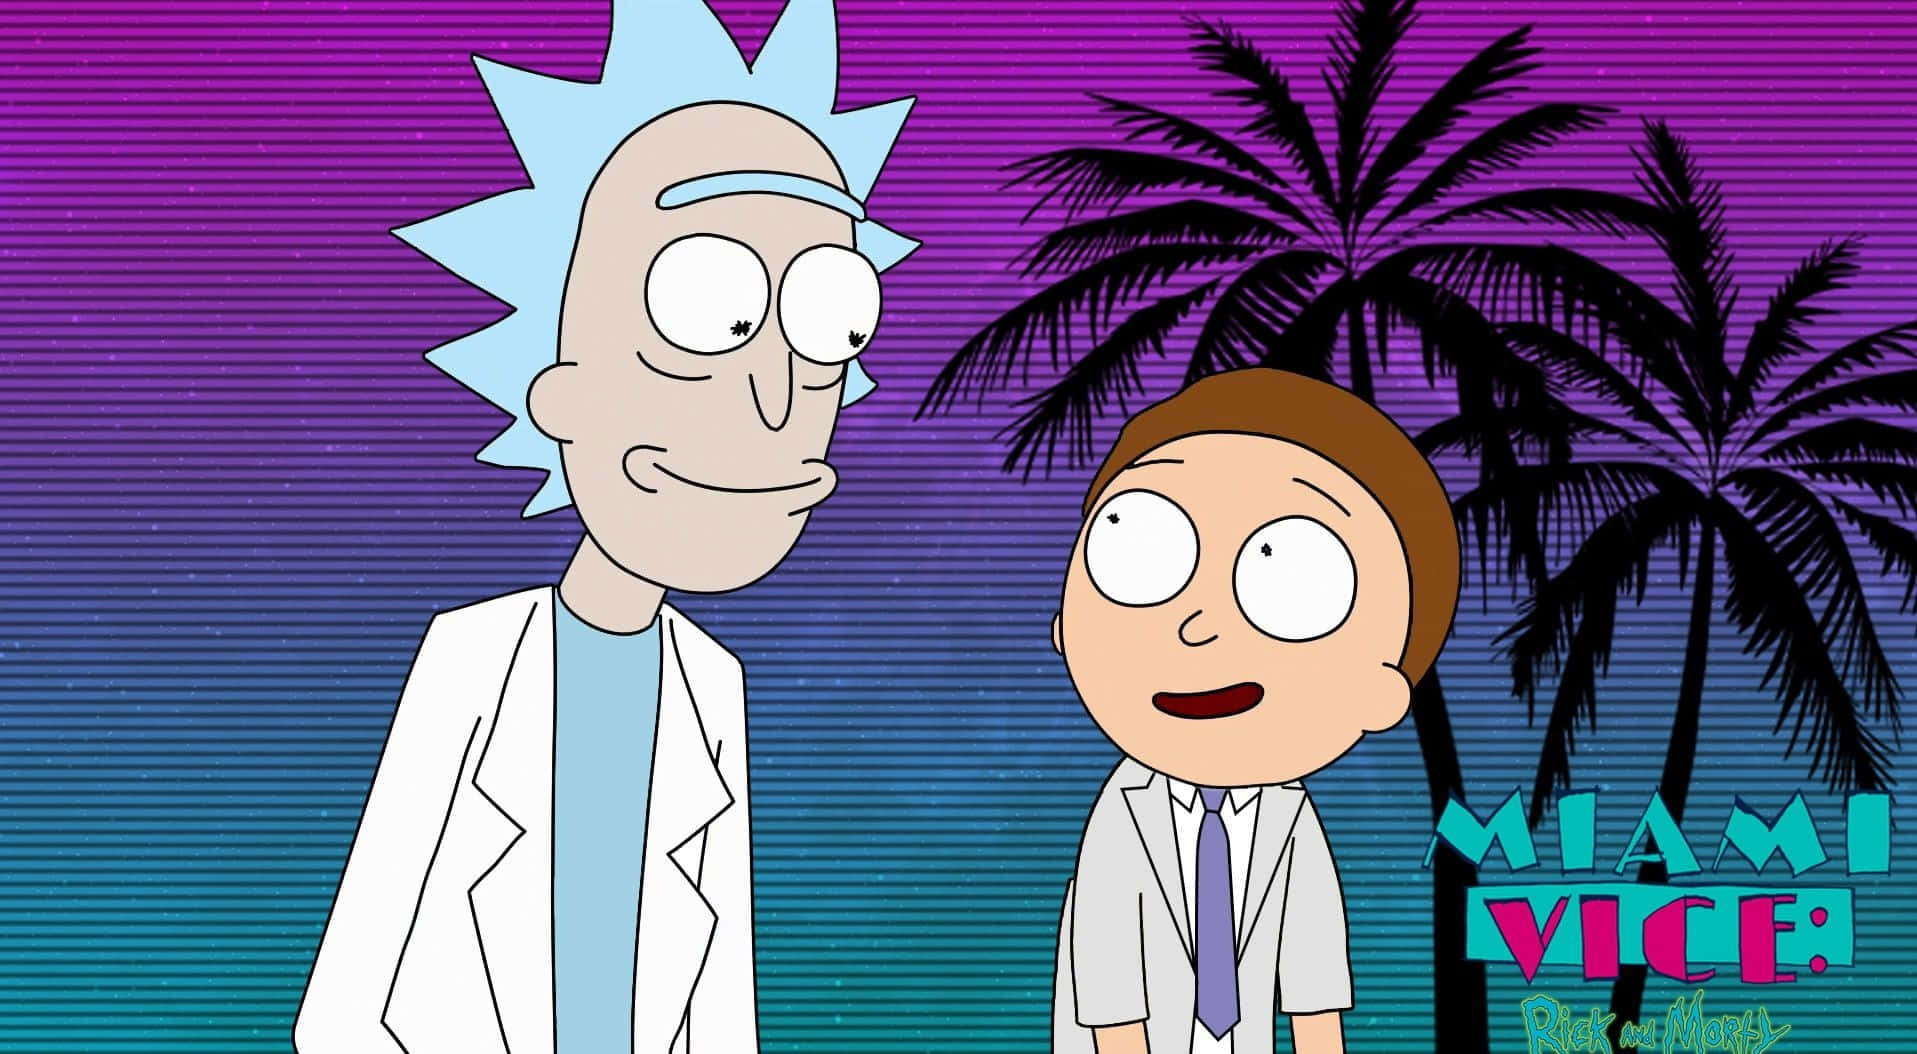 "Come join Rick and Morty on their wild adventures - even in Backwoods!" Wallpaper